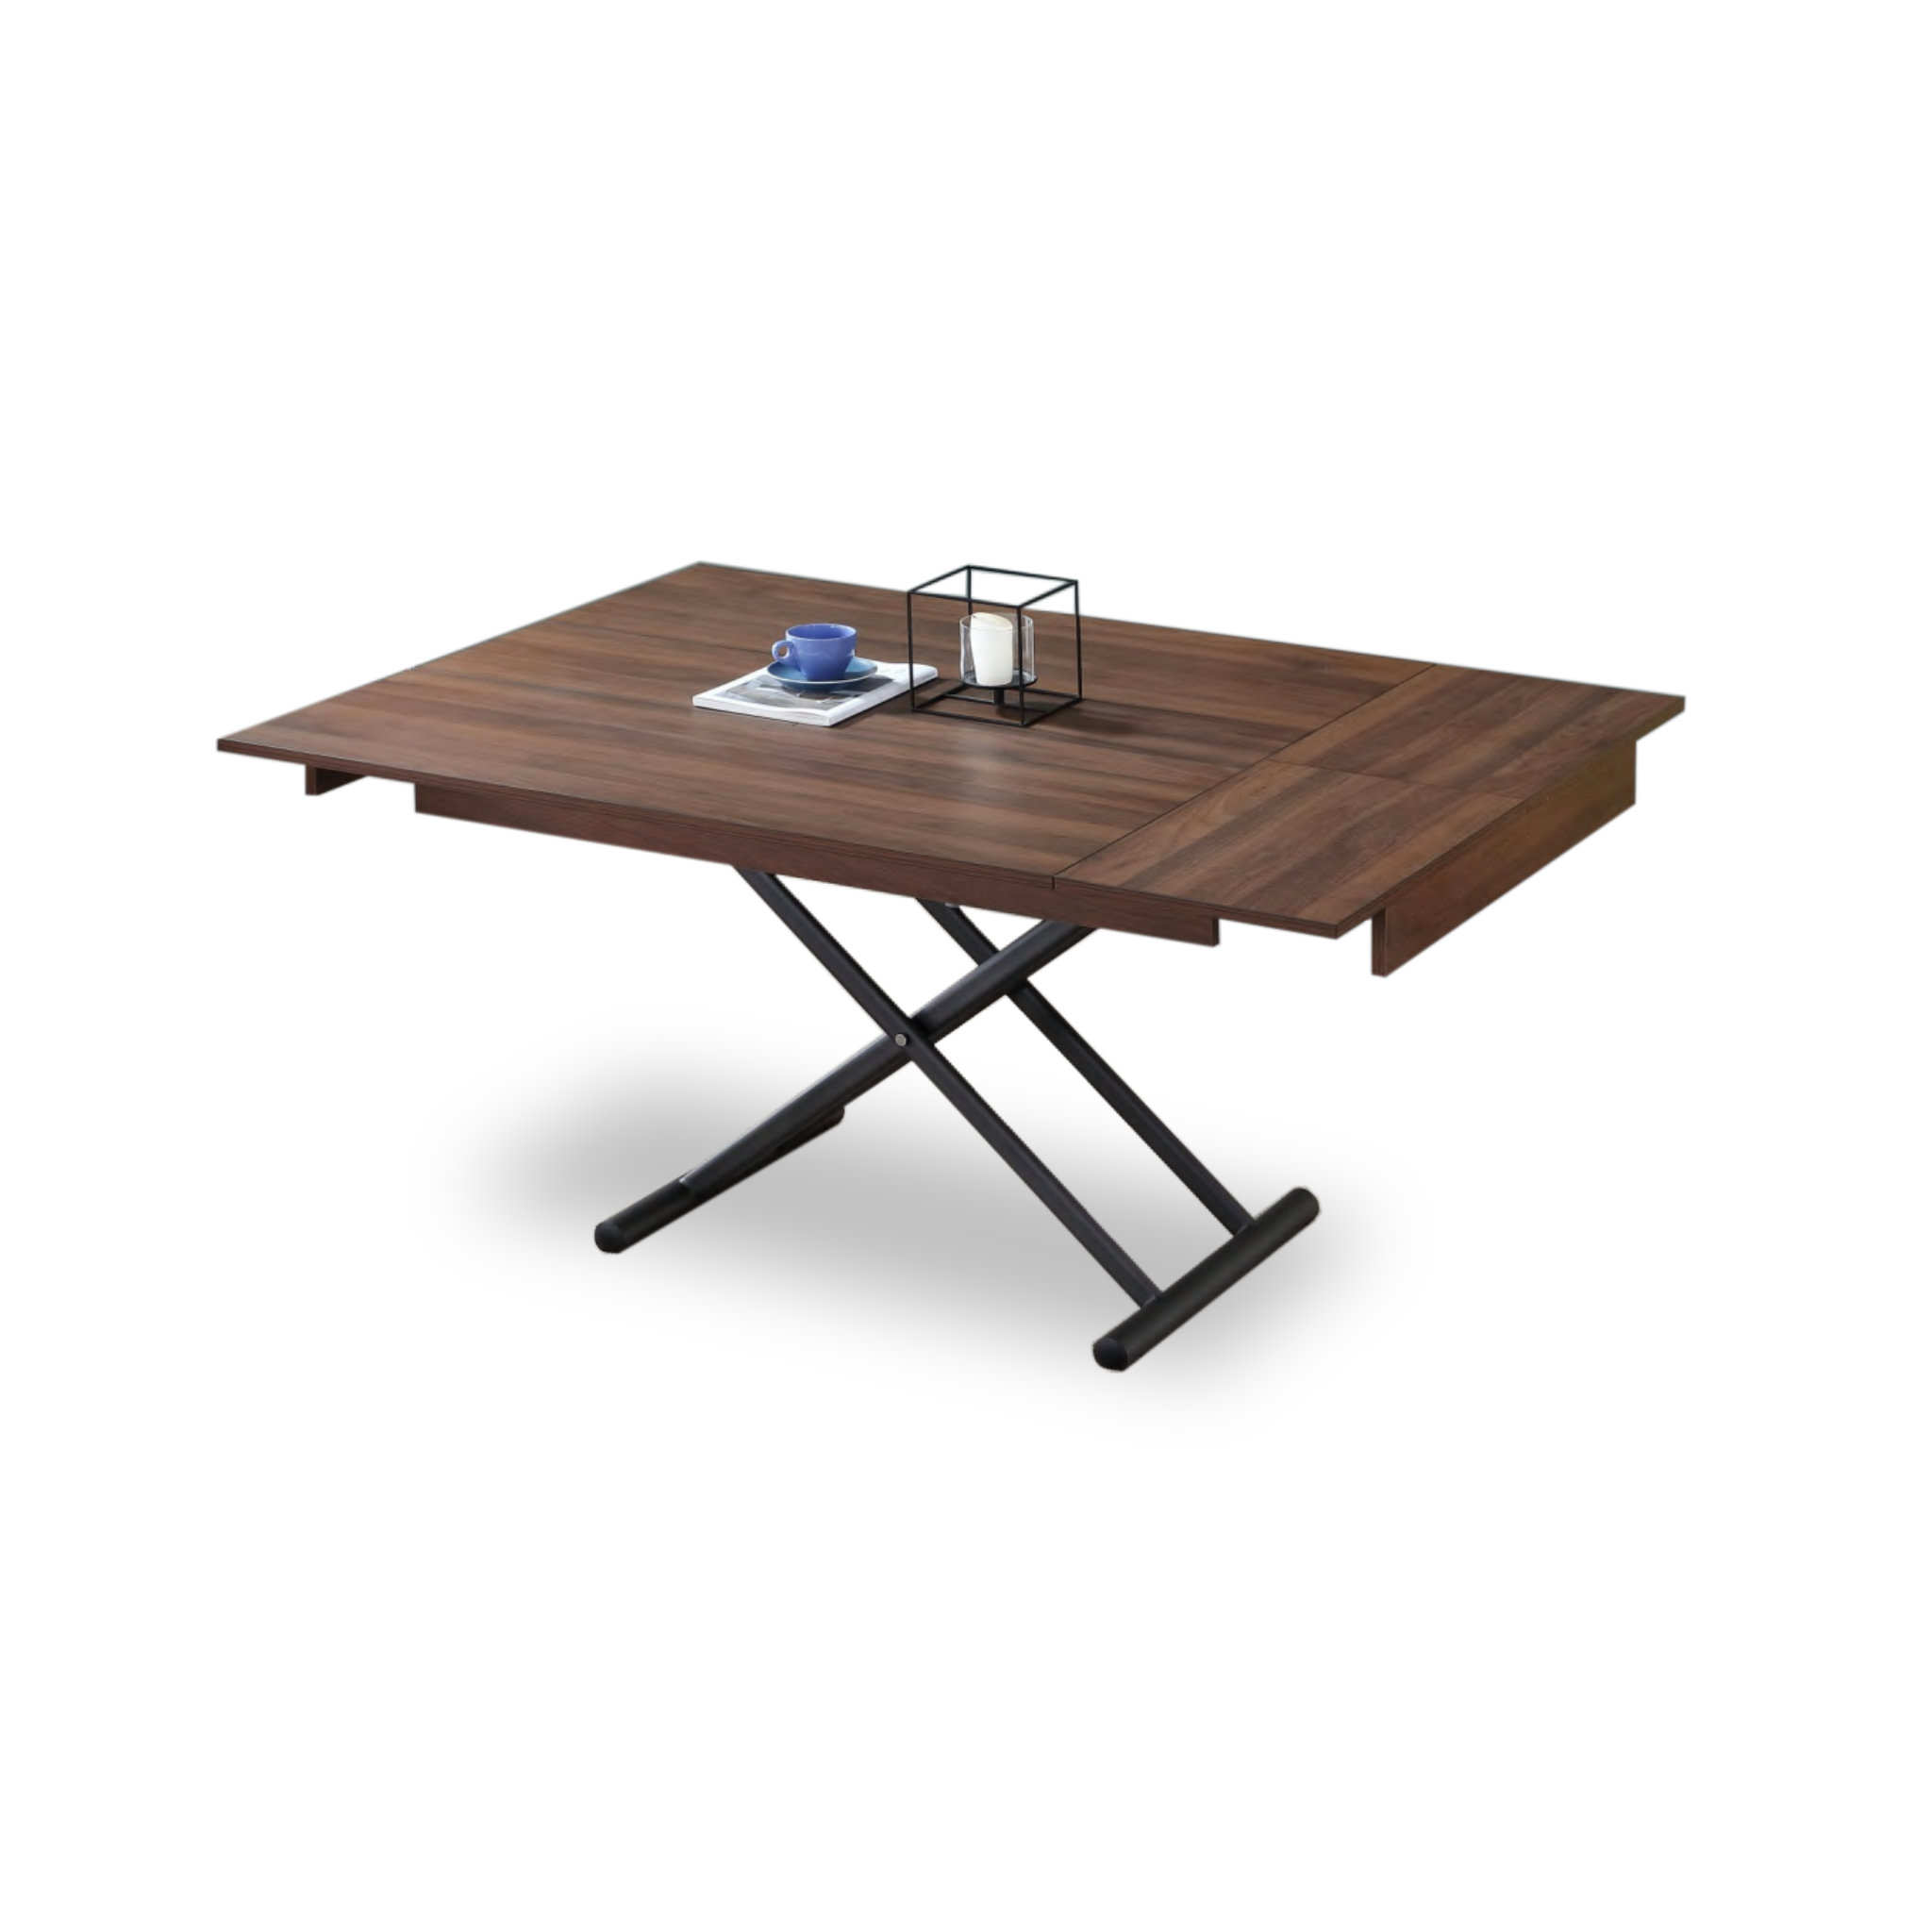 https://expandfurniture.com/wp-content/uploads/2020/08/Divide-rectangle-to-square-transforming-table-height-adjustable.jpg